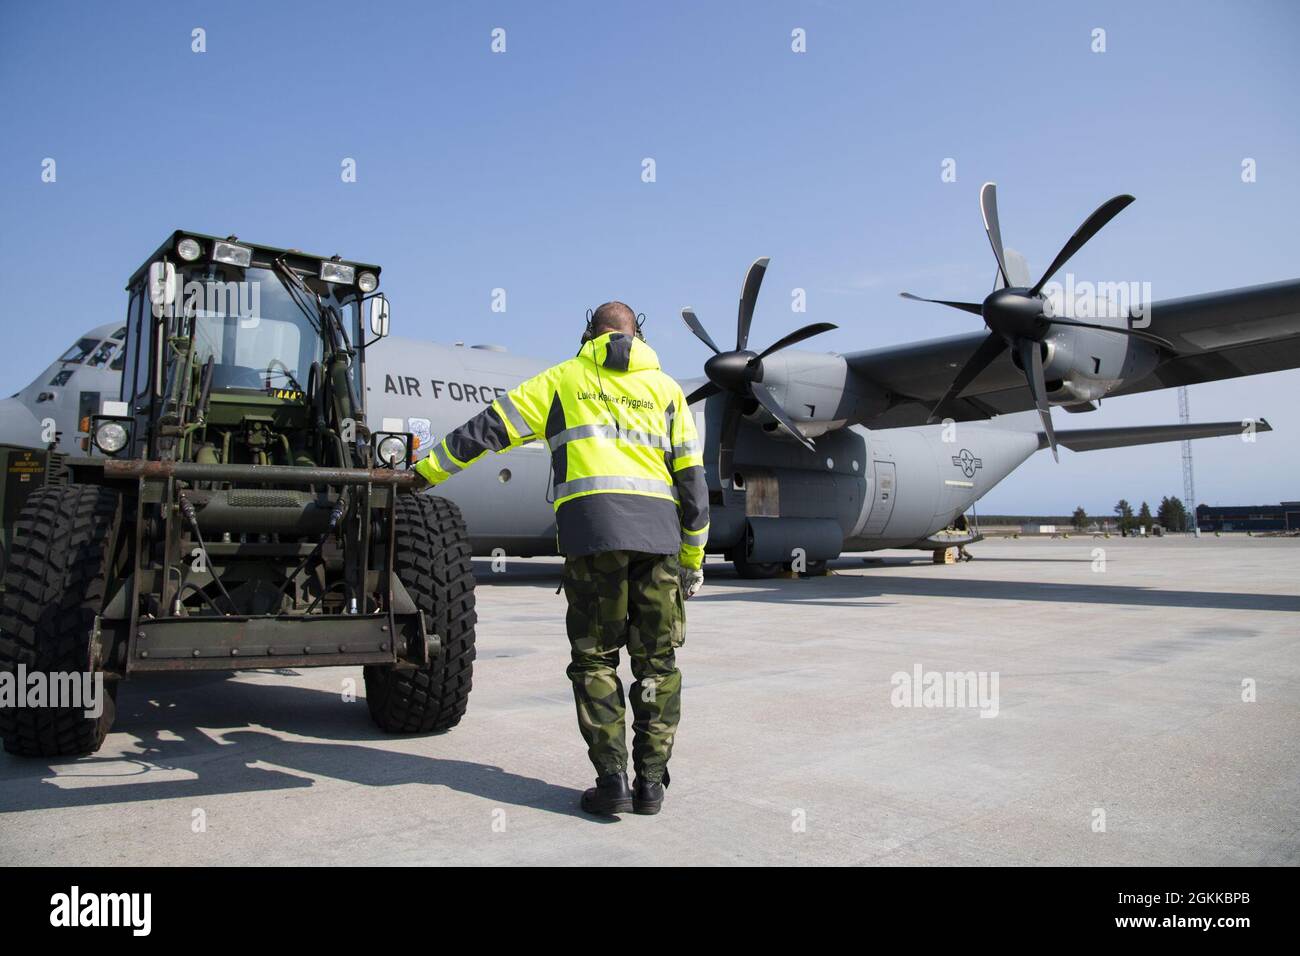 A member of the Swedish air force waits to unload cargo from a U.S. Air Force C-130 Hercules aircraft at Kallax Air Base, Sweden, May 14, 2021. Members of the Swedish air force provided support for U.S. Air Force Airmen during the Arctic Challenge Exercise 2021, a reoccurring exercise that this year is Norwegian air force-led. Training with allies and regional partners in the Nordic region enhances flexibility and interoperability among ally and partner nations in the interest of strengthening combined response capabilities and demonstrating international resolve. Stock Photo